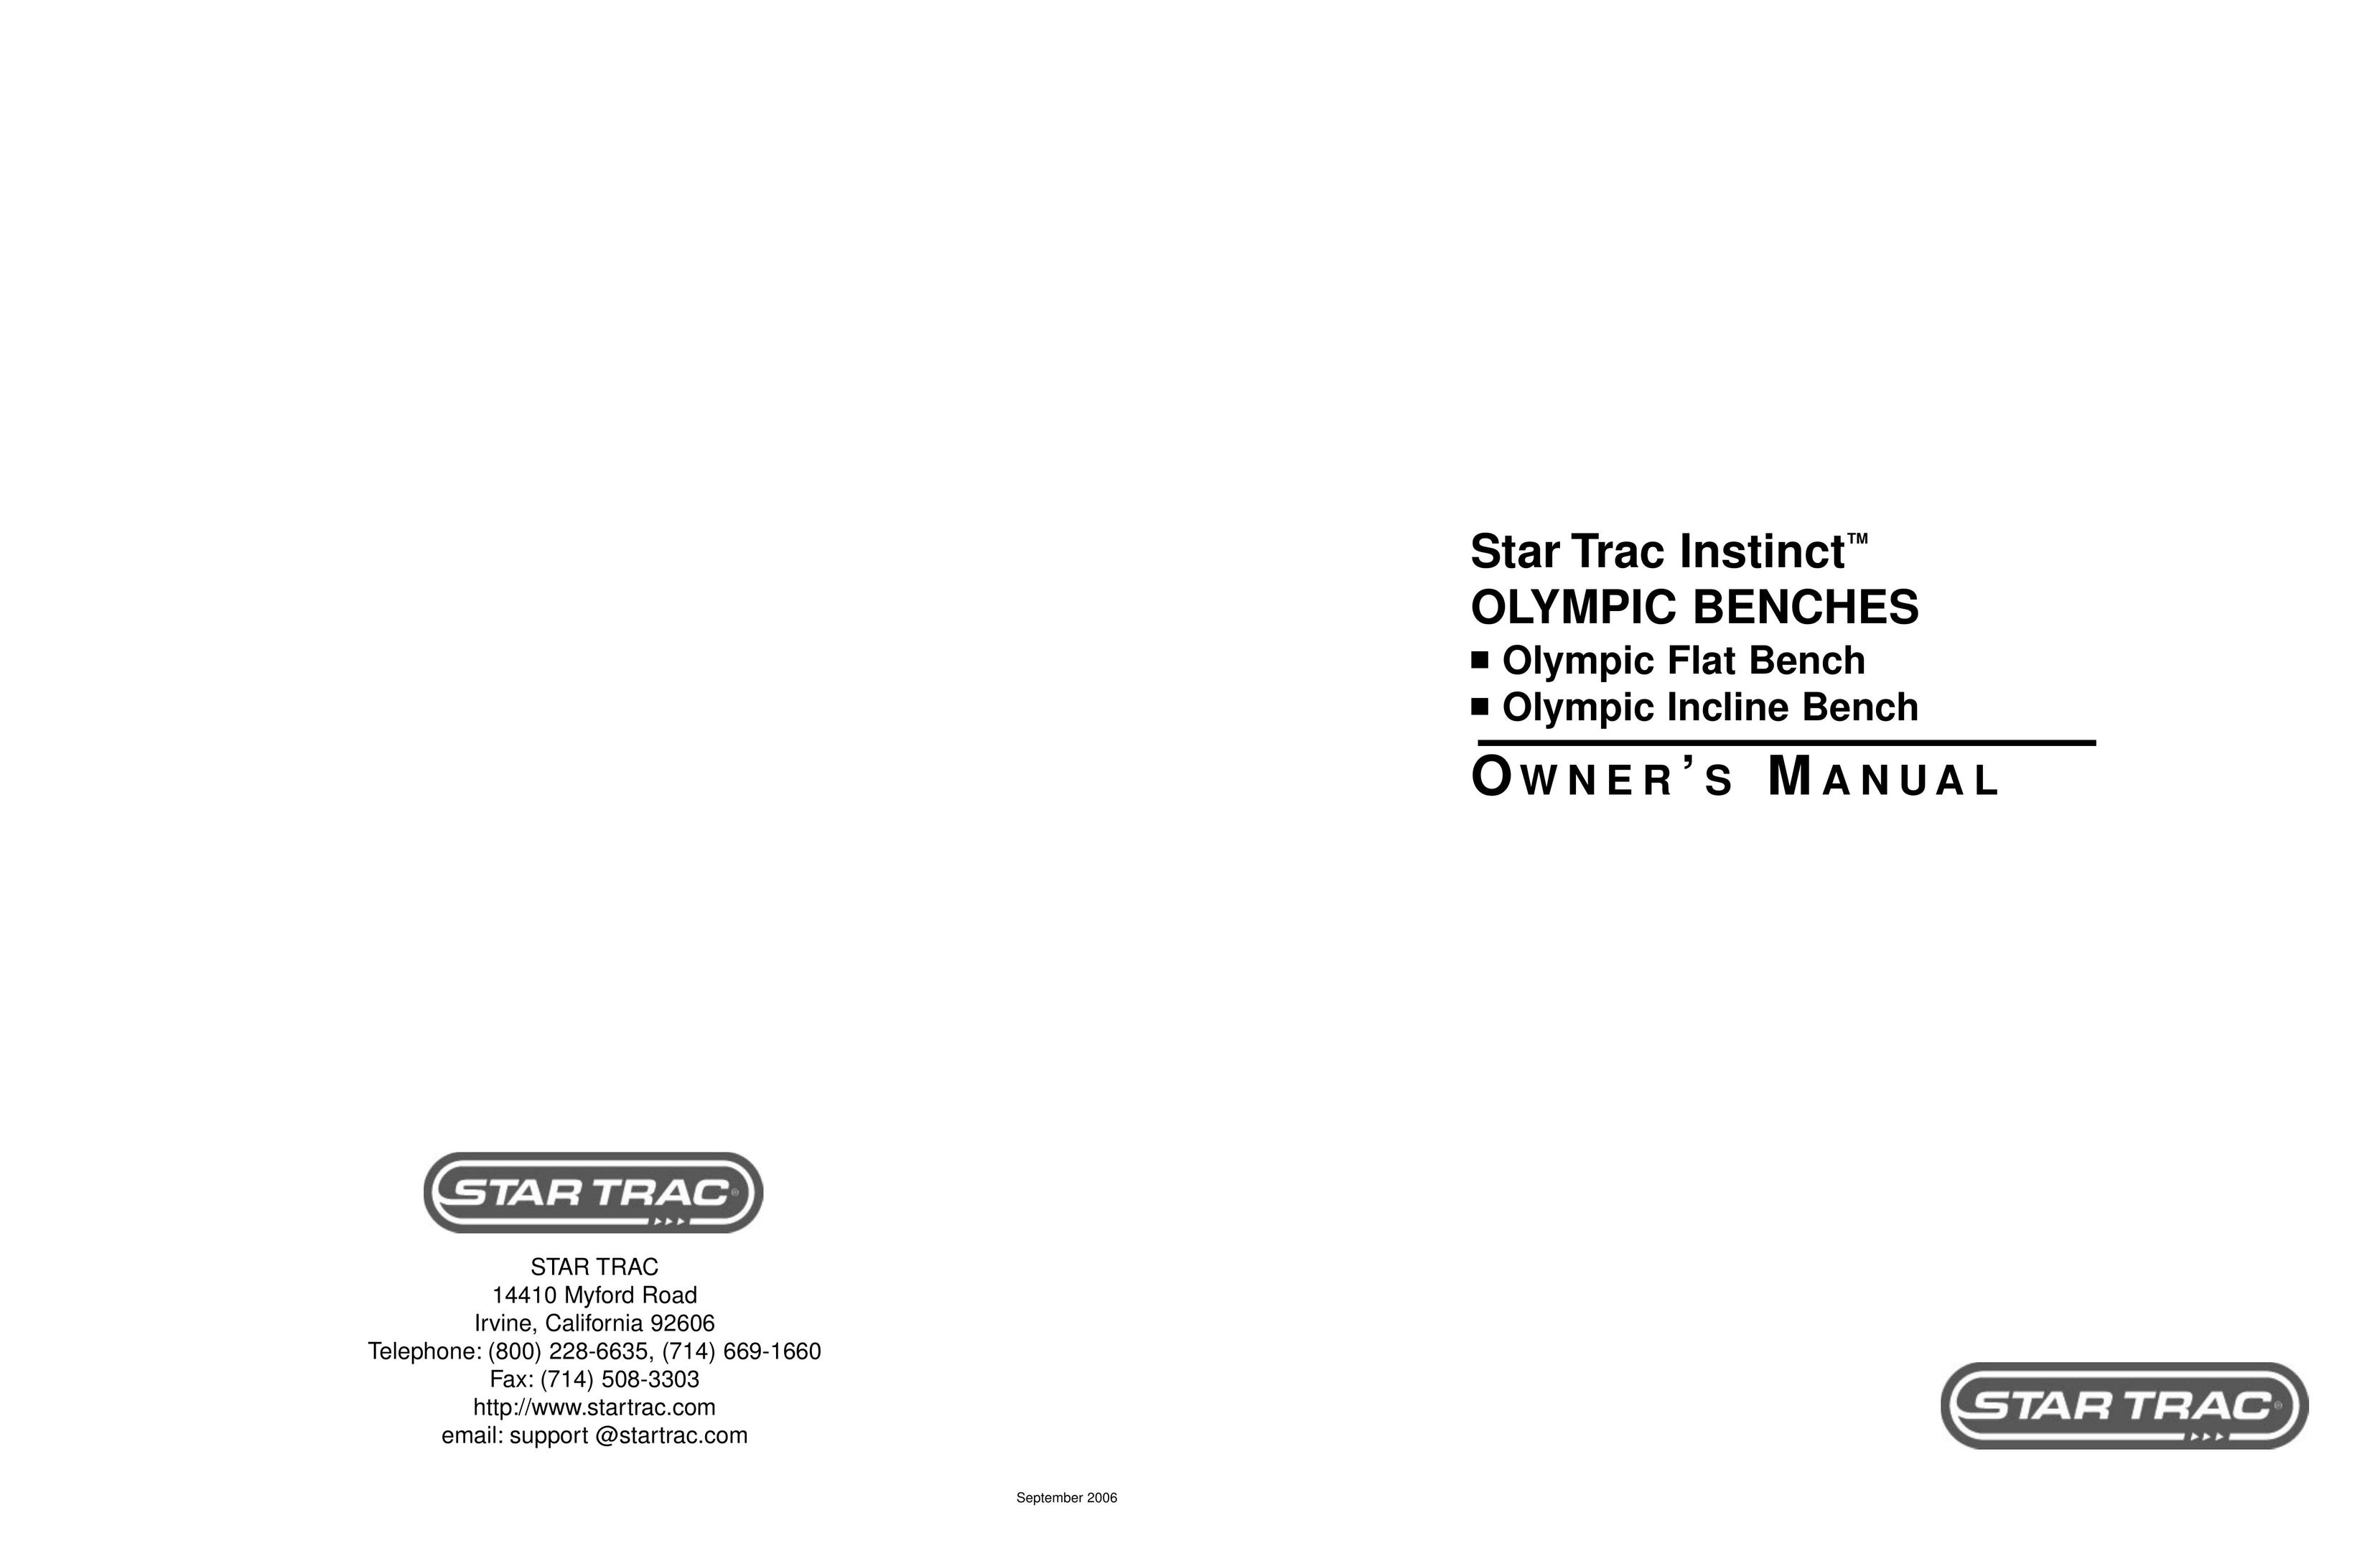 Star Trac Olympic Bench Home Gym User Manual